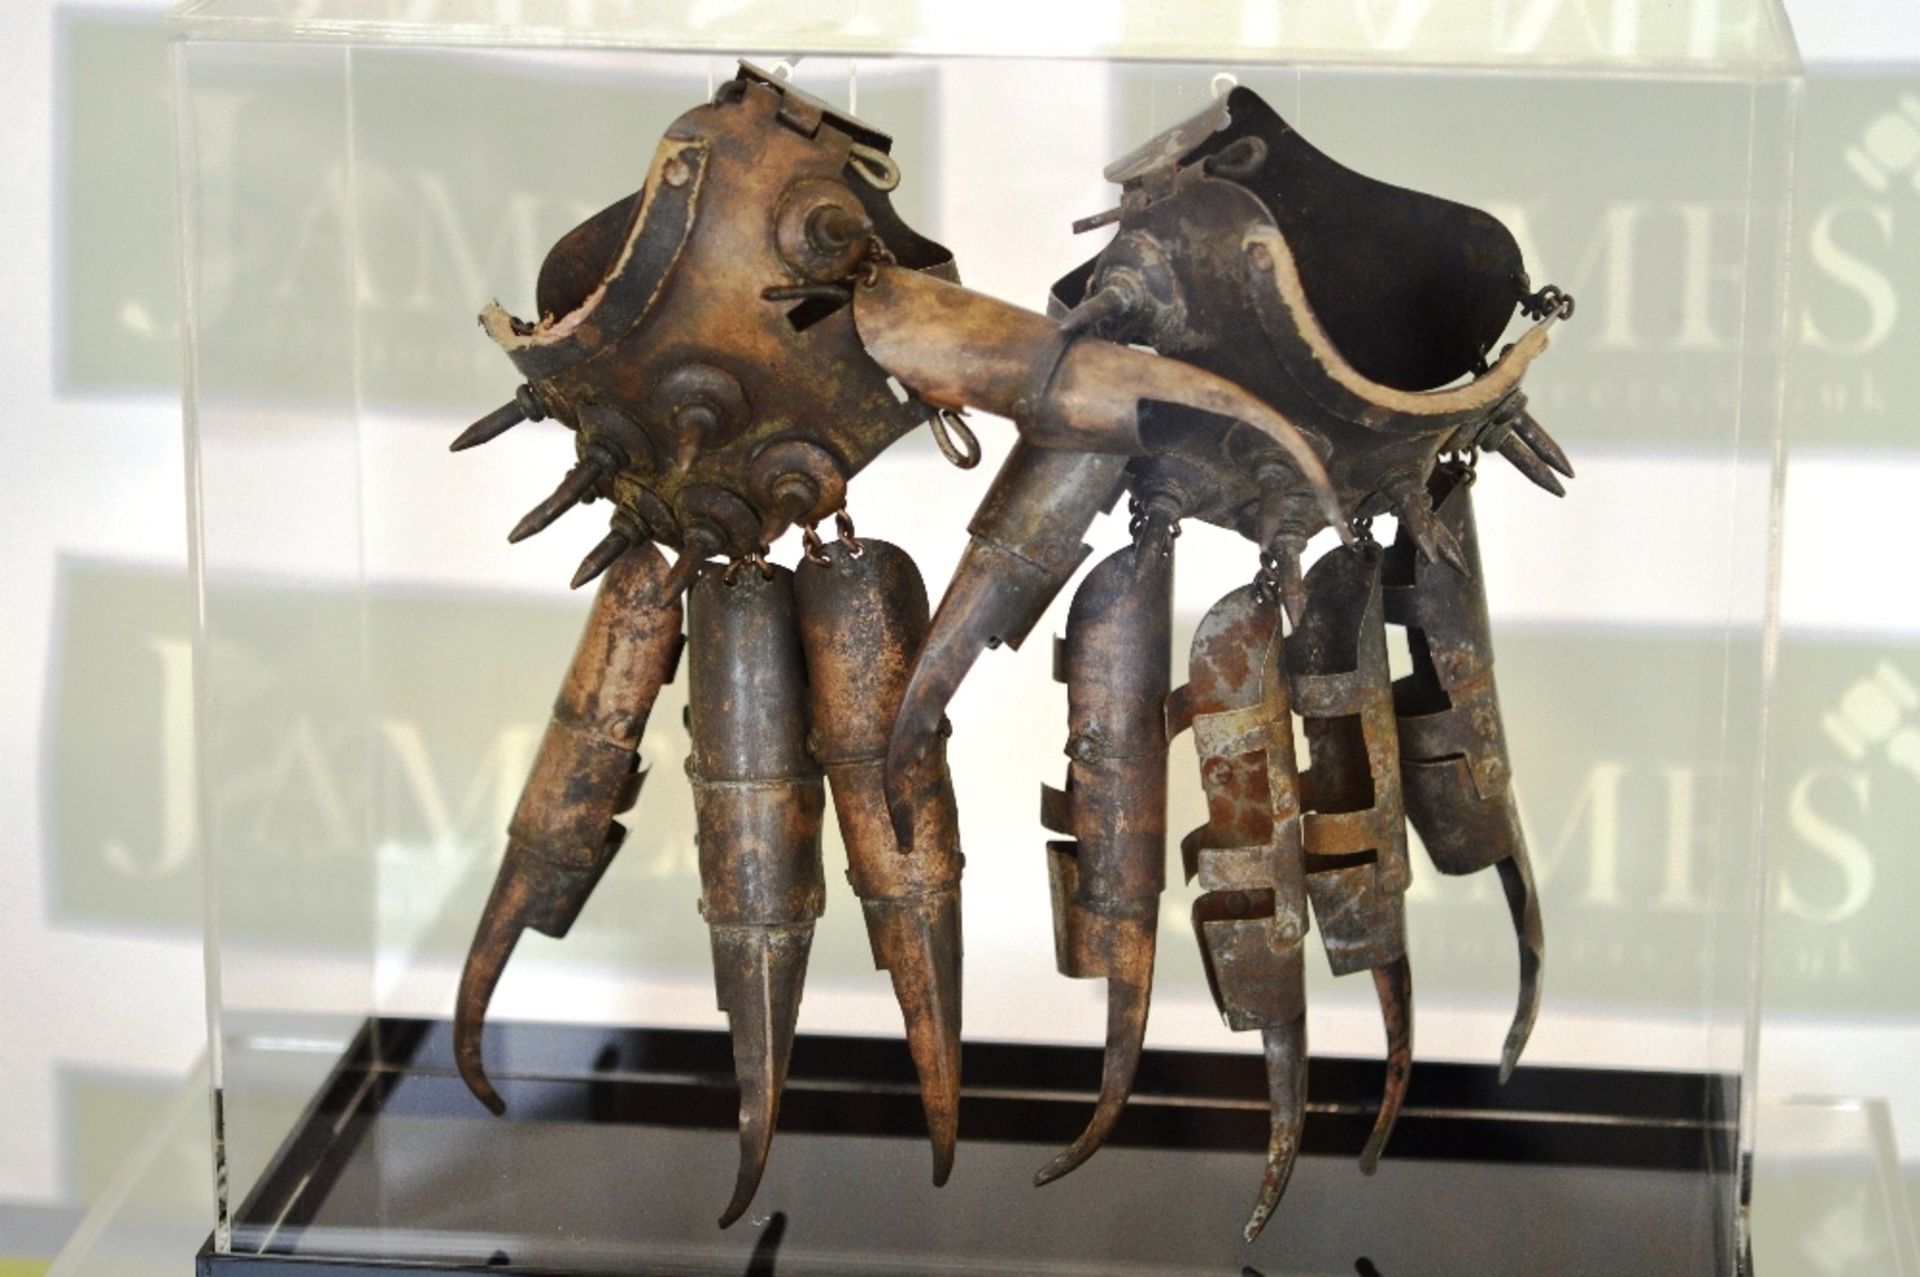 A pair of metal spiked Japanese fighting gloves, signs of use..comes in display case